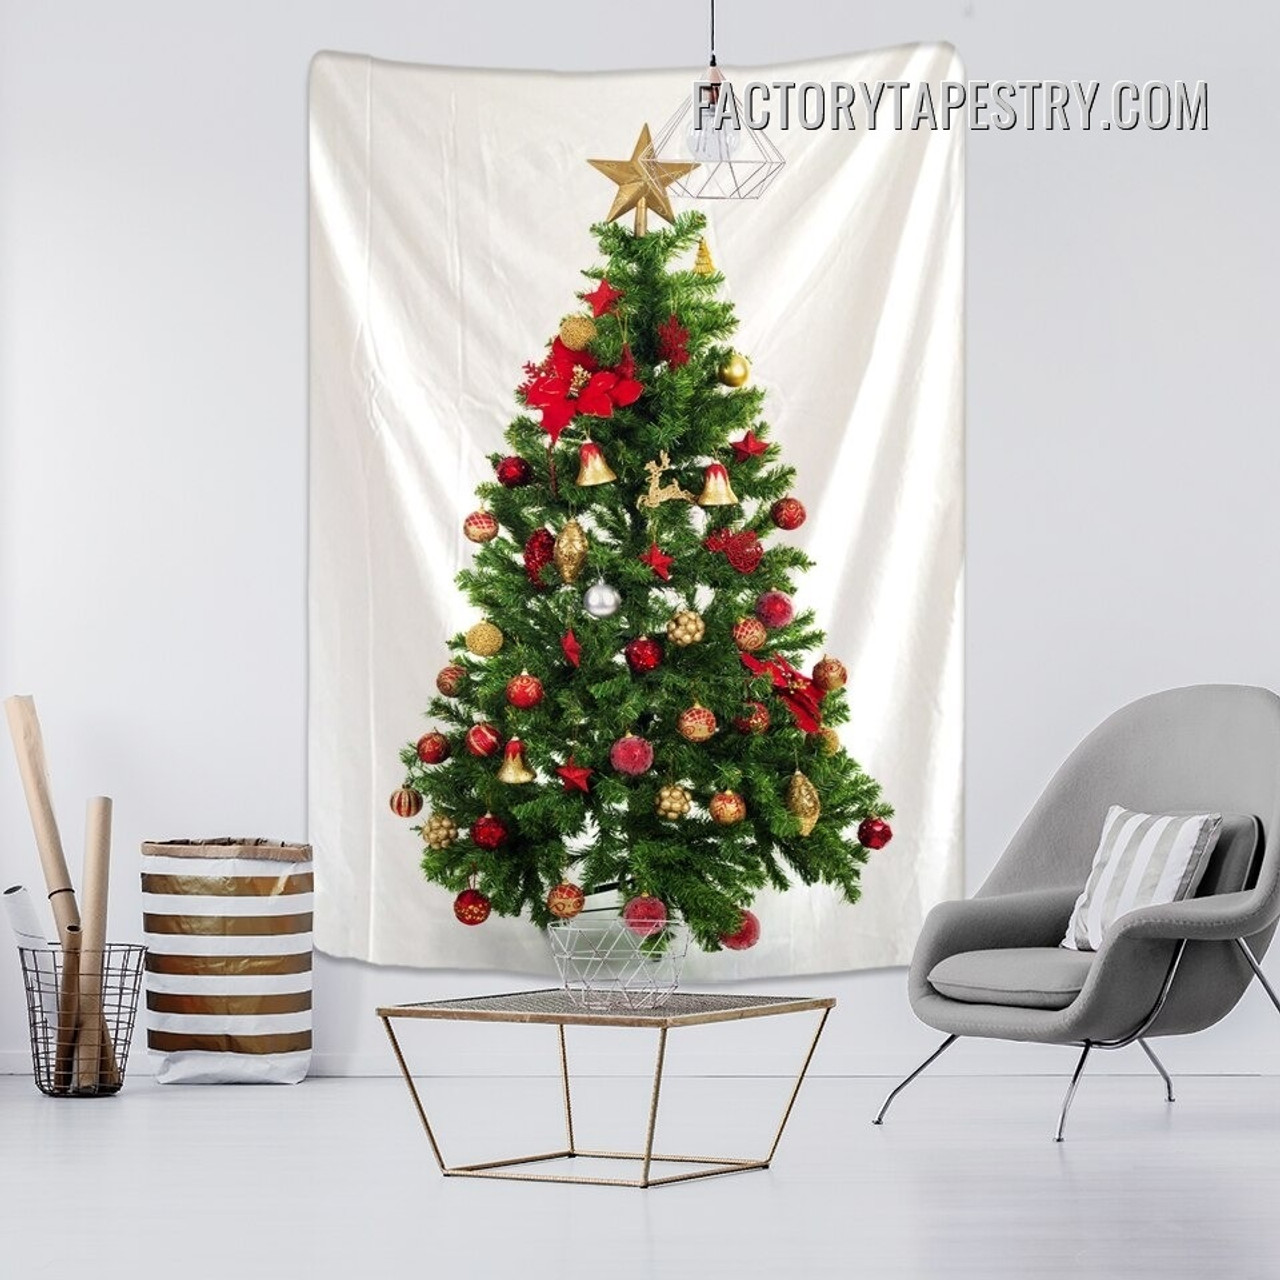 https://cdn11.bigcommerce.com/s-nuxjkvdw5/images/stencil/1280x1280/products/1517/2172/Decorated-Christmas-Tree-I-Occasion-Modern-Wall-Hanging-Tapestry-for-Bedroom-Dorm-Home-Decor__72516.1647111122.jpg?c=1